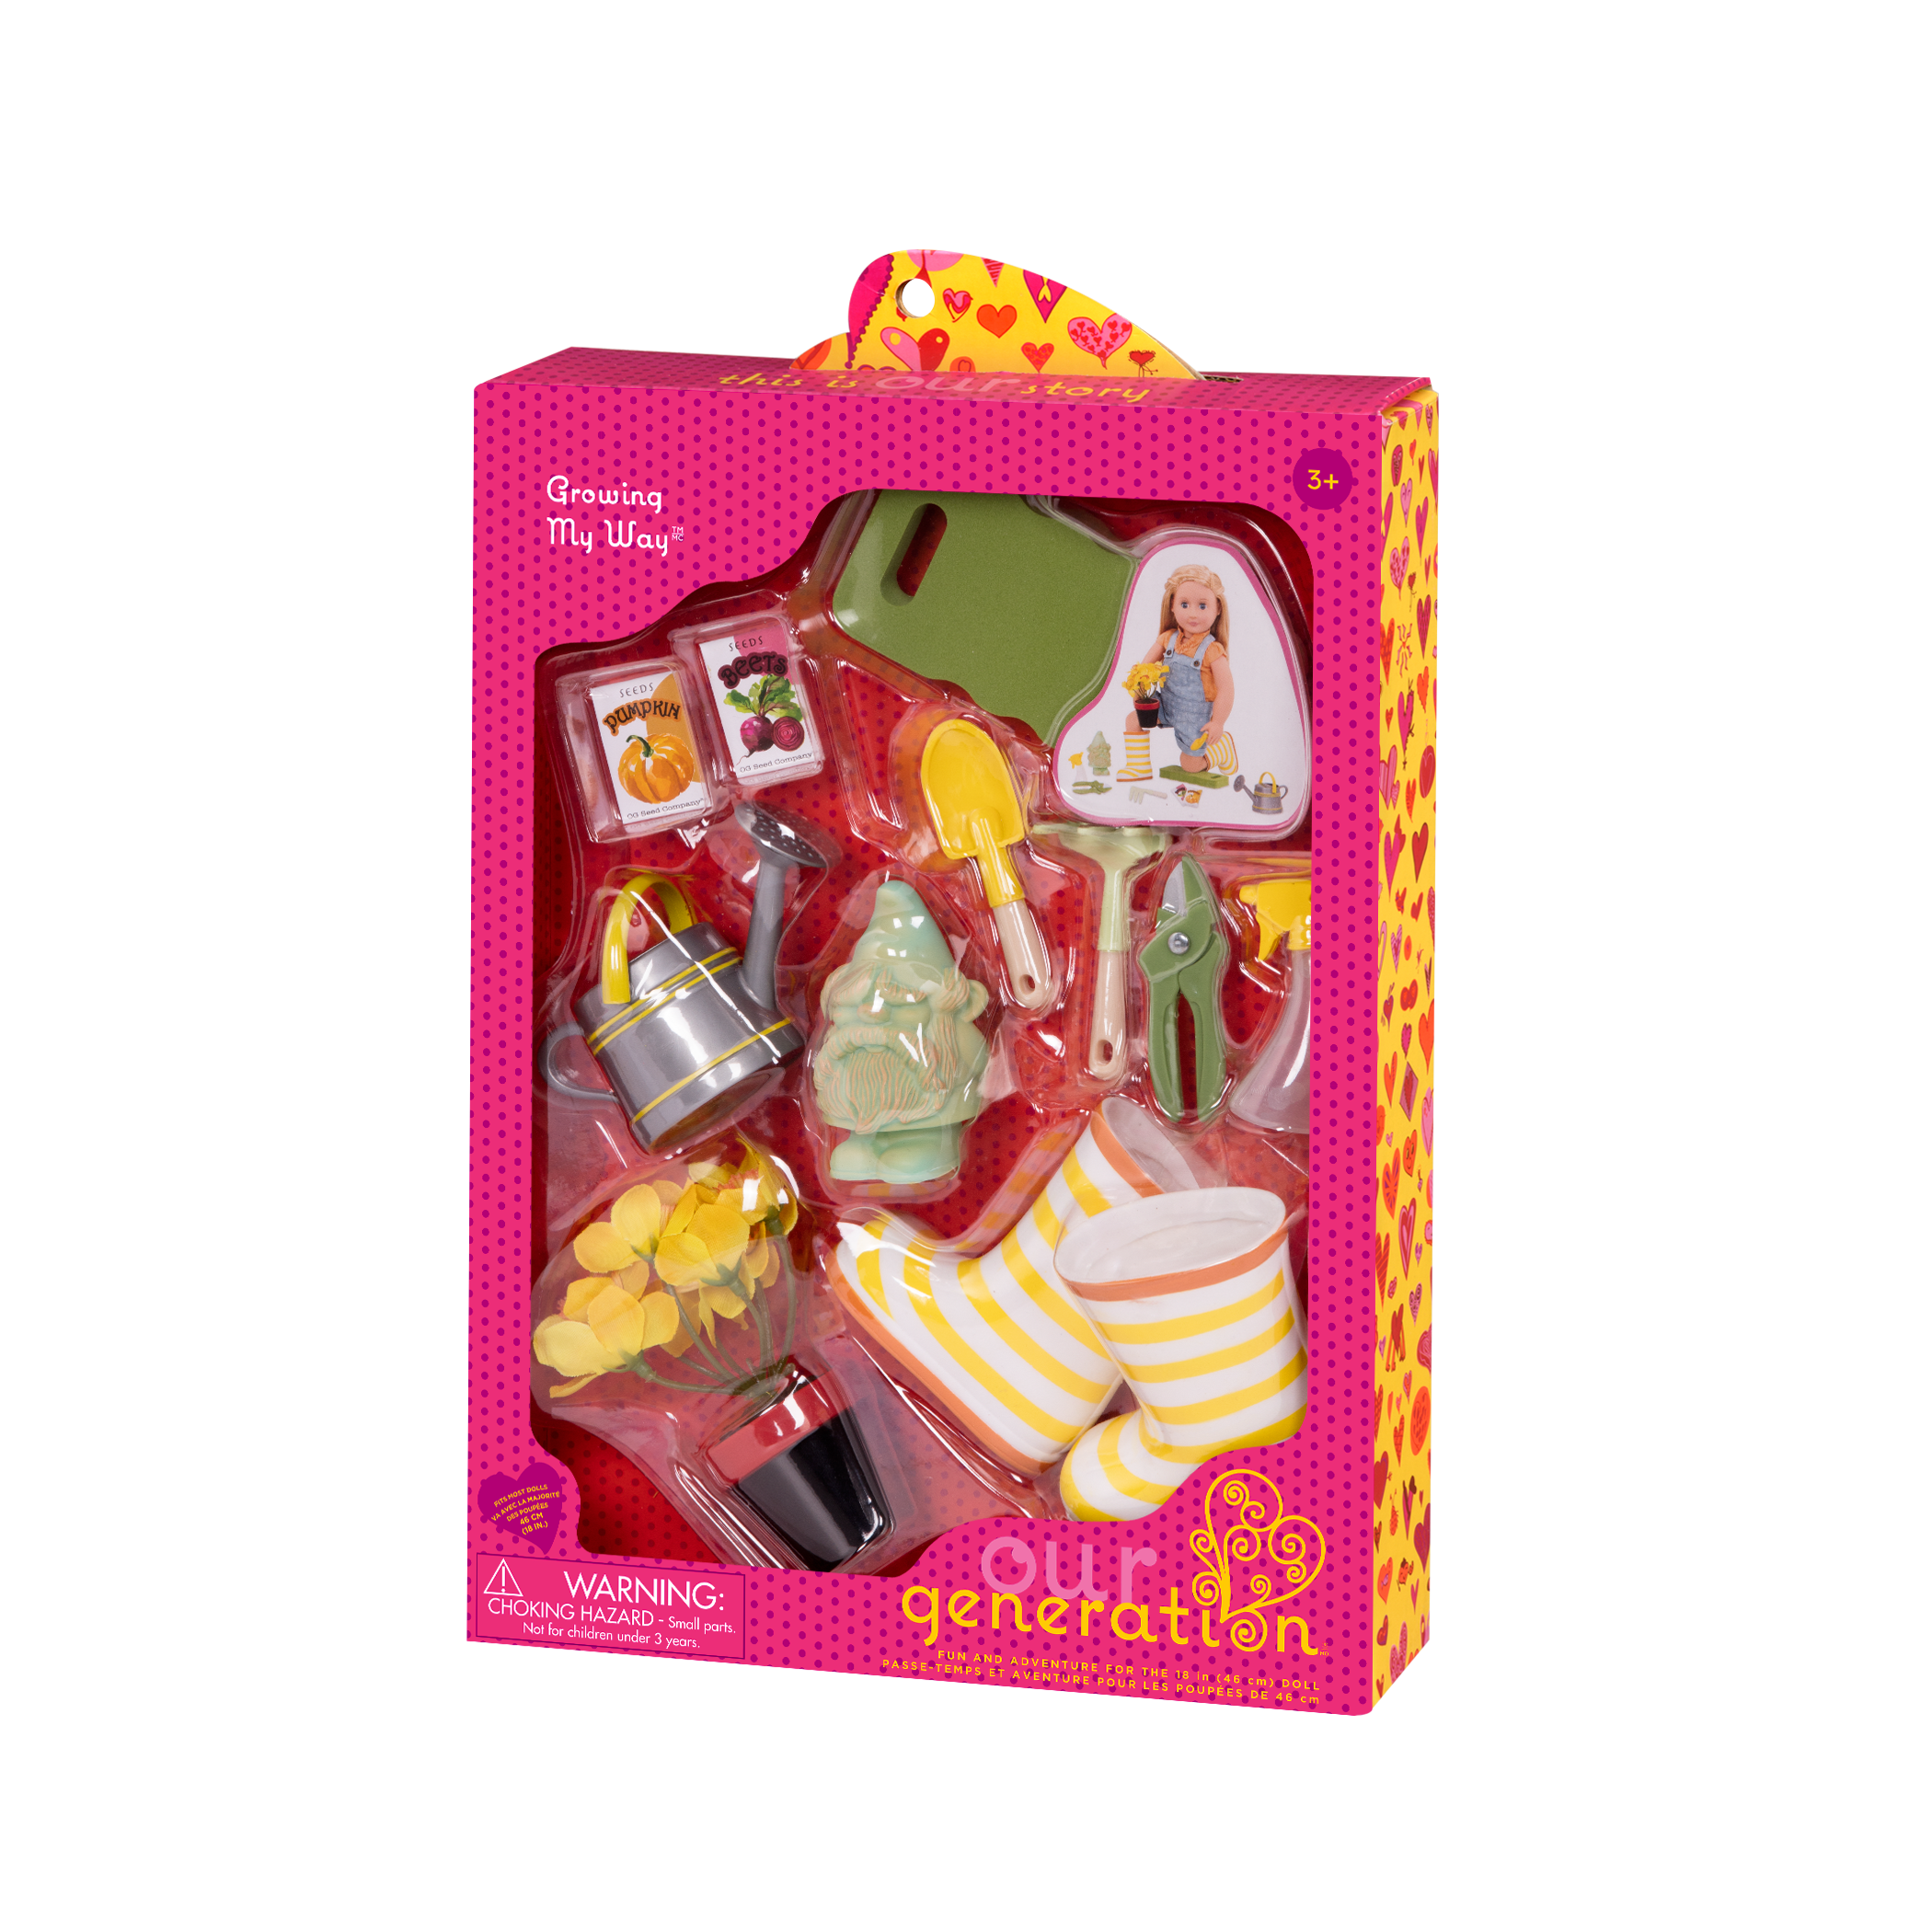 18-inch doll with gardening playset